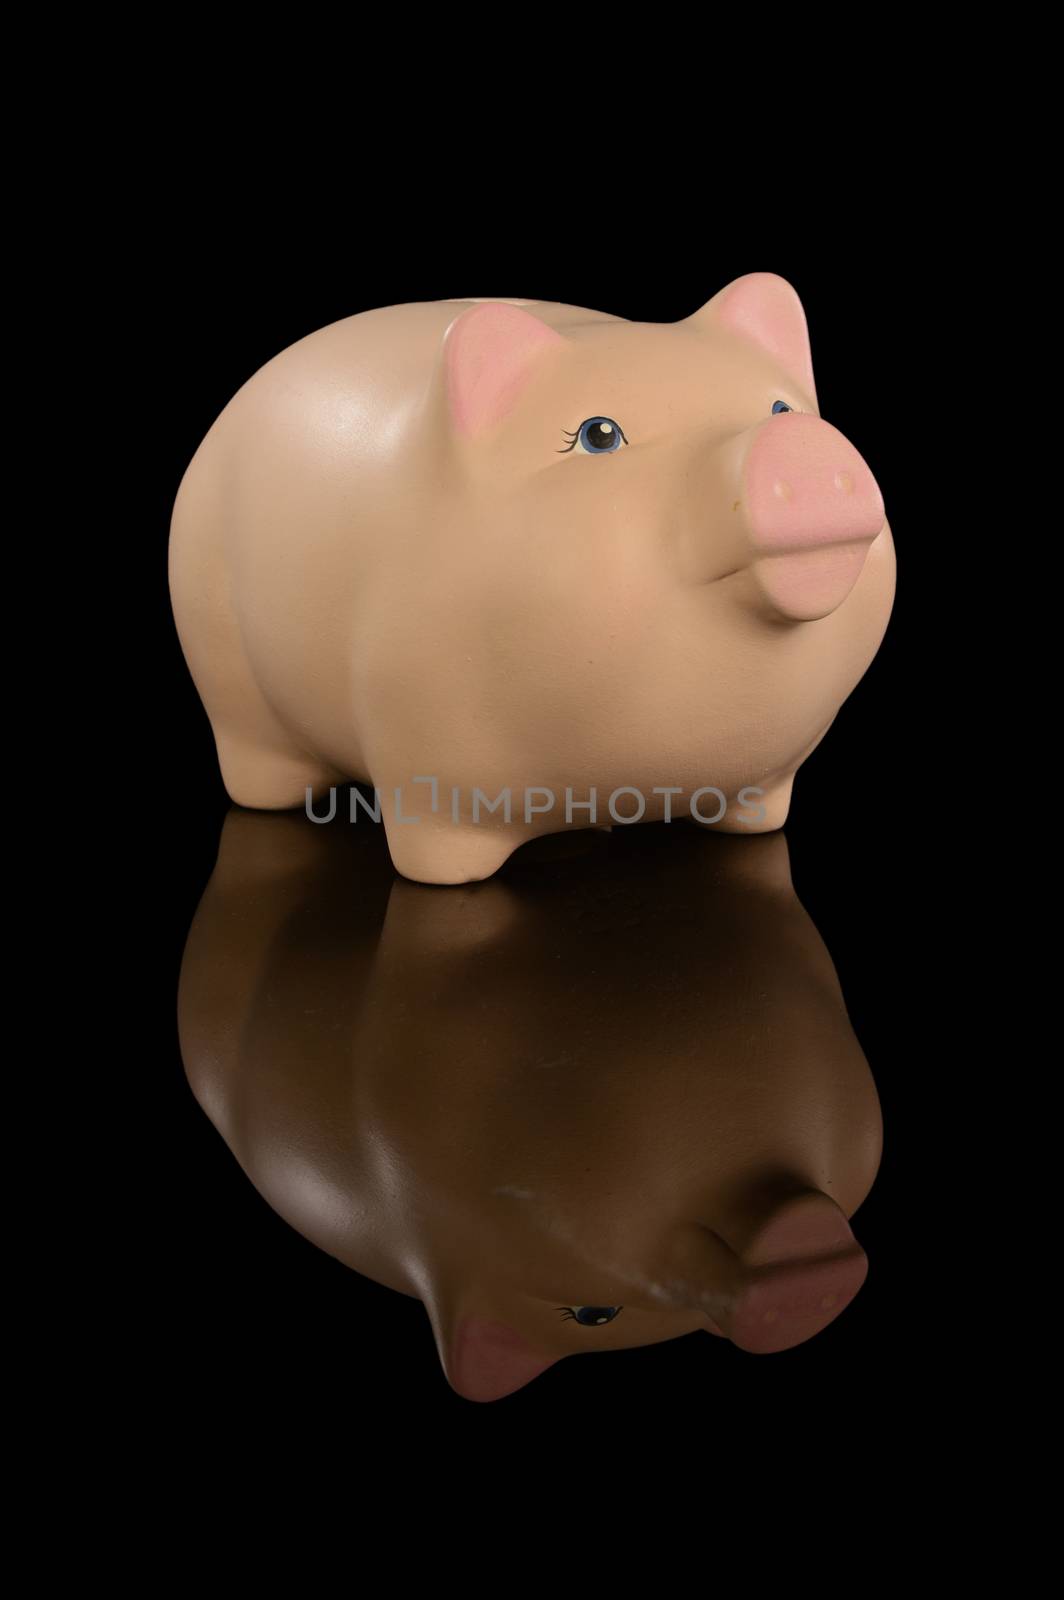 An isolated over a black reflective background image of a ceramic coin piggy bank to illustrate financial concepts.